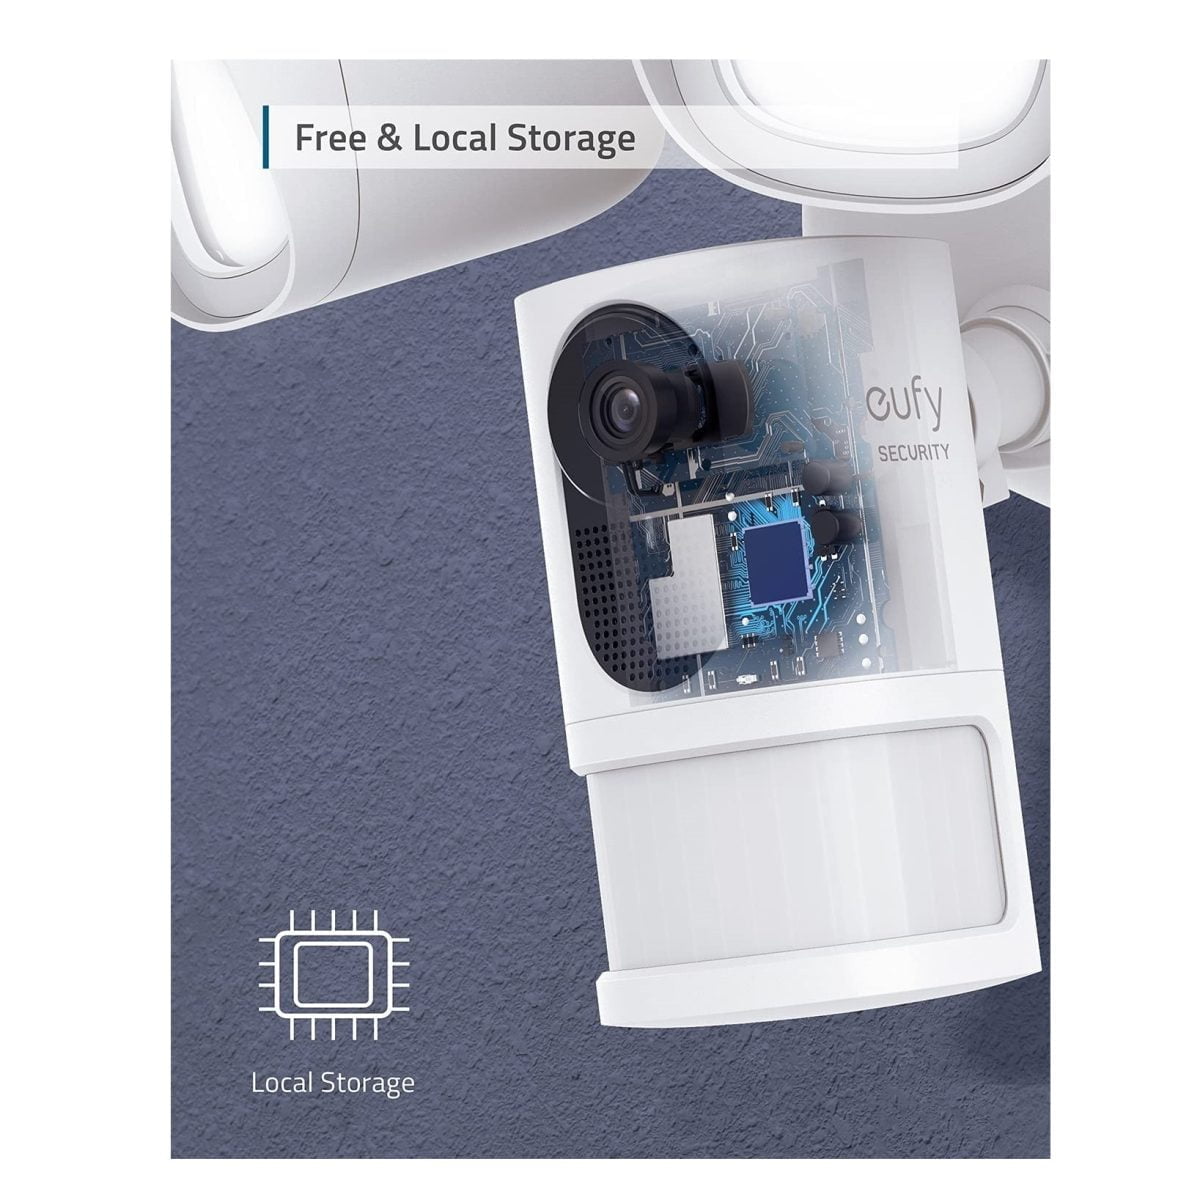 71Grcmwjbes. Ac Sl1500 1 Eufy &Lt;H1 Class=&Quot;Product-Meta__Title Heading H1&Quot;&Gt;Eufy Security Floodlight Camera 2K&Lt;/H1&Gt; Https://Www.youtube.com/Watch?V=Sskynd9Kubc &Lt;Ul Class=&Quot;A-Unordered-List A-Vertical A-Spacing-Mini&Quot;&Gt; &Lt;Li&Gt;&Lt;Span Class=&Quot;A-List-Item&Quot;&Gt;Drop-In Anytime In 2K: Live-Stream And Record In Full 2K Hd So You Can See Exactly Who’s There In Crisp Clarity.&Lt;/Span&Gt;&Lt;/Li&Gt; &Lt;Li&Gt;&Lt;Span Class=&Quot;A-List-Item&Quot;&Gt;No Hidden Costs: Designed To Protect Your Home As Well As Your Wallet, Eufy Security Products Are One-Time Purchases That Combine Security With Convenience.&Lt;/Span&Gt;&Lt;/Li&Gt; &Lt;Li&Gt;&Lt;Span Class=&Quot;A-List-Item&Quot;&Gt;Turn Night Into Day: 2,500-Lumen Super-Bright Motion-Activated Floodlights Deter Intruders And Ensure Detailed, Full-Color Recordings Even At Night.&Lt;/Span&Gt;&Lt;/Li&Gt; &Lt;Li&Gt;&Lt;Span Class=&Quot;A-List-Item&Quot;&Gt;Smart Siren: A Harsh Warning For Any Intruders. A High-Volume Alarm Can Be Triggered To Scare Off Any Unwanted Visitors.&Lt;/Span&Gt;&Lt;/Li&Gt; &Lt;Li&Gt;&Lt;Span Class=&Quot;A-List-Item&Quot;&Gt;Intelligent Detection And Notifications: The Built-In Ai Reduces The Number Of False Alerts You Receive By Intelligently Differentiating People From Objects. Note: Not Compatible With Homebase.&Lt;/Span&Gt;&Lt;/Li&Gt; &Lt;/Ul&Gt; &Lt;H5&Gt;Warranty: Eufy Product Warranty&Lt;/H5&Gt; Floodlight Eufy Security Floodlight Camera 2K Wired T8424321